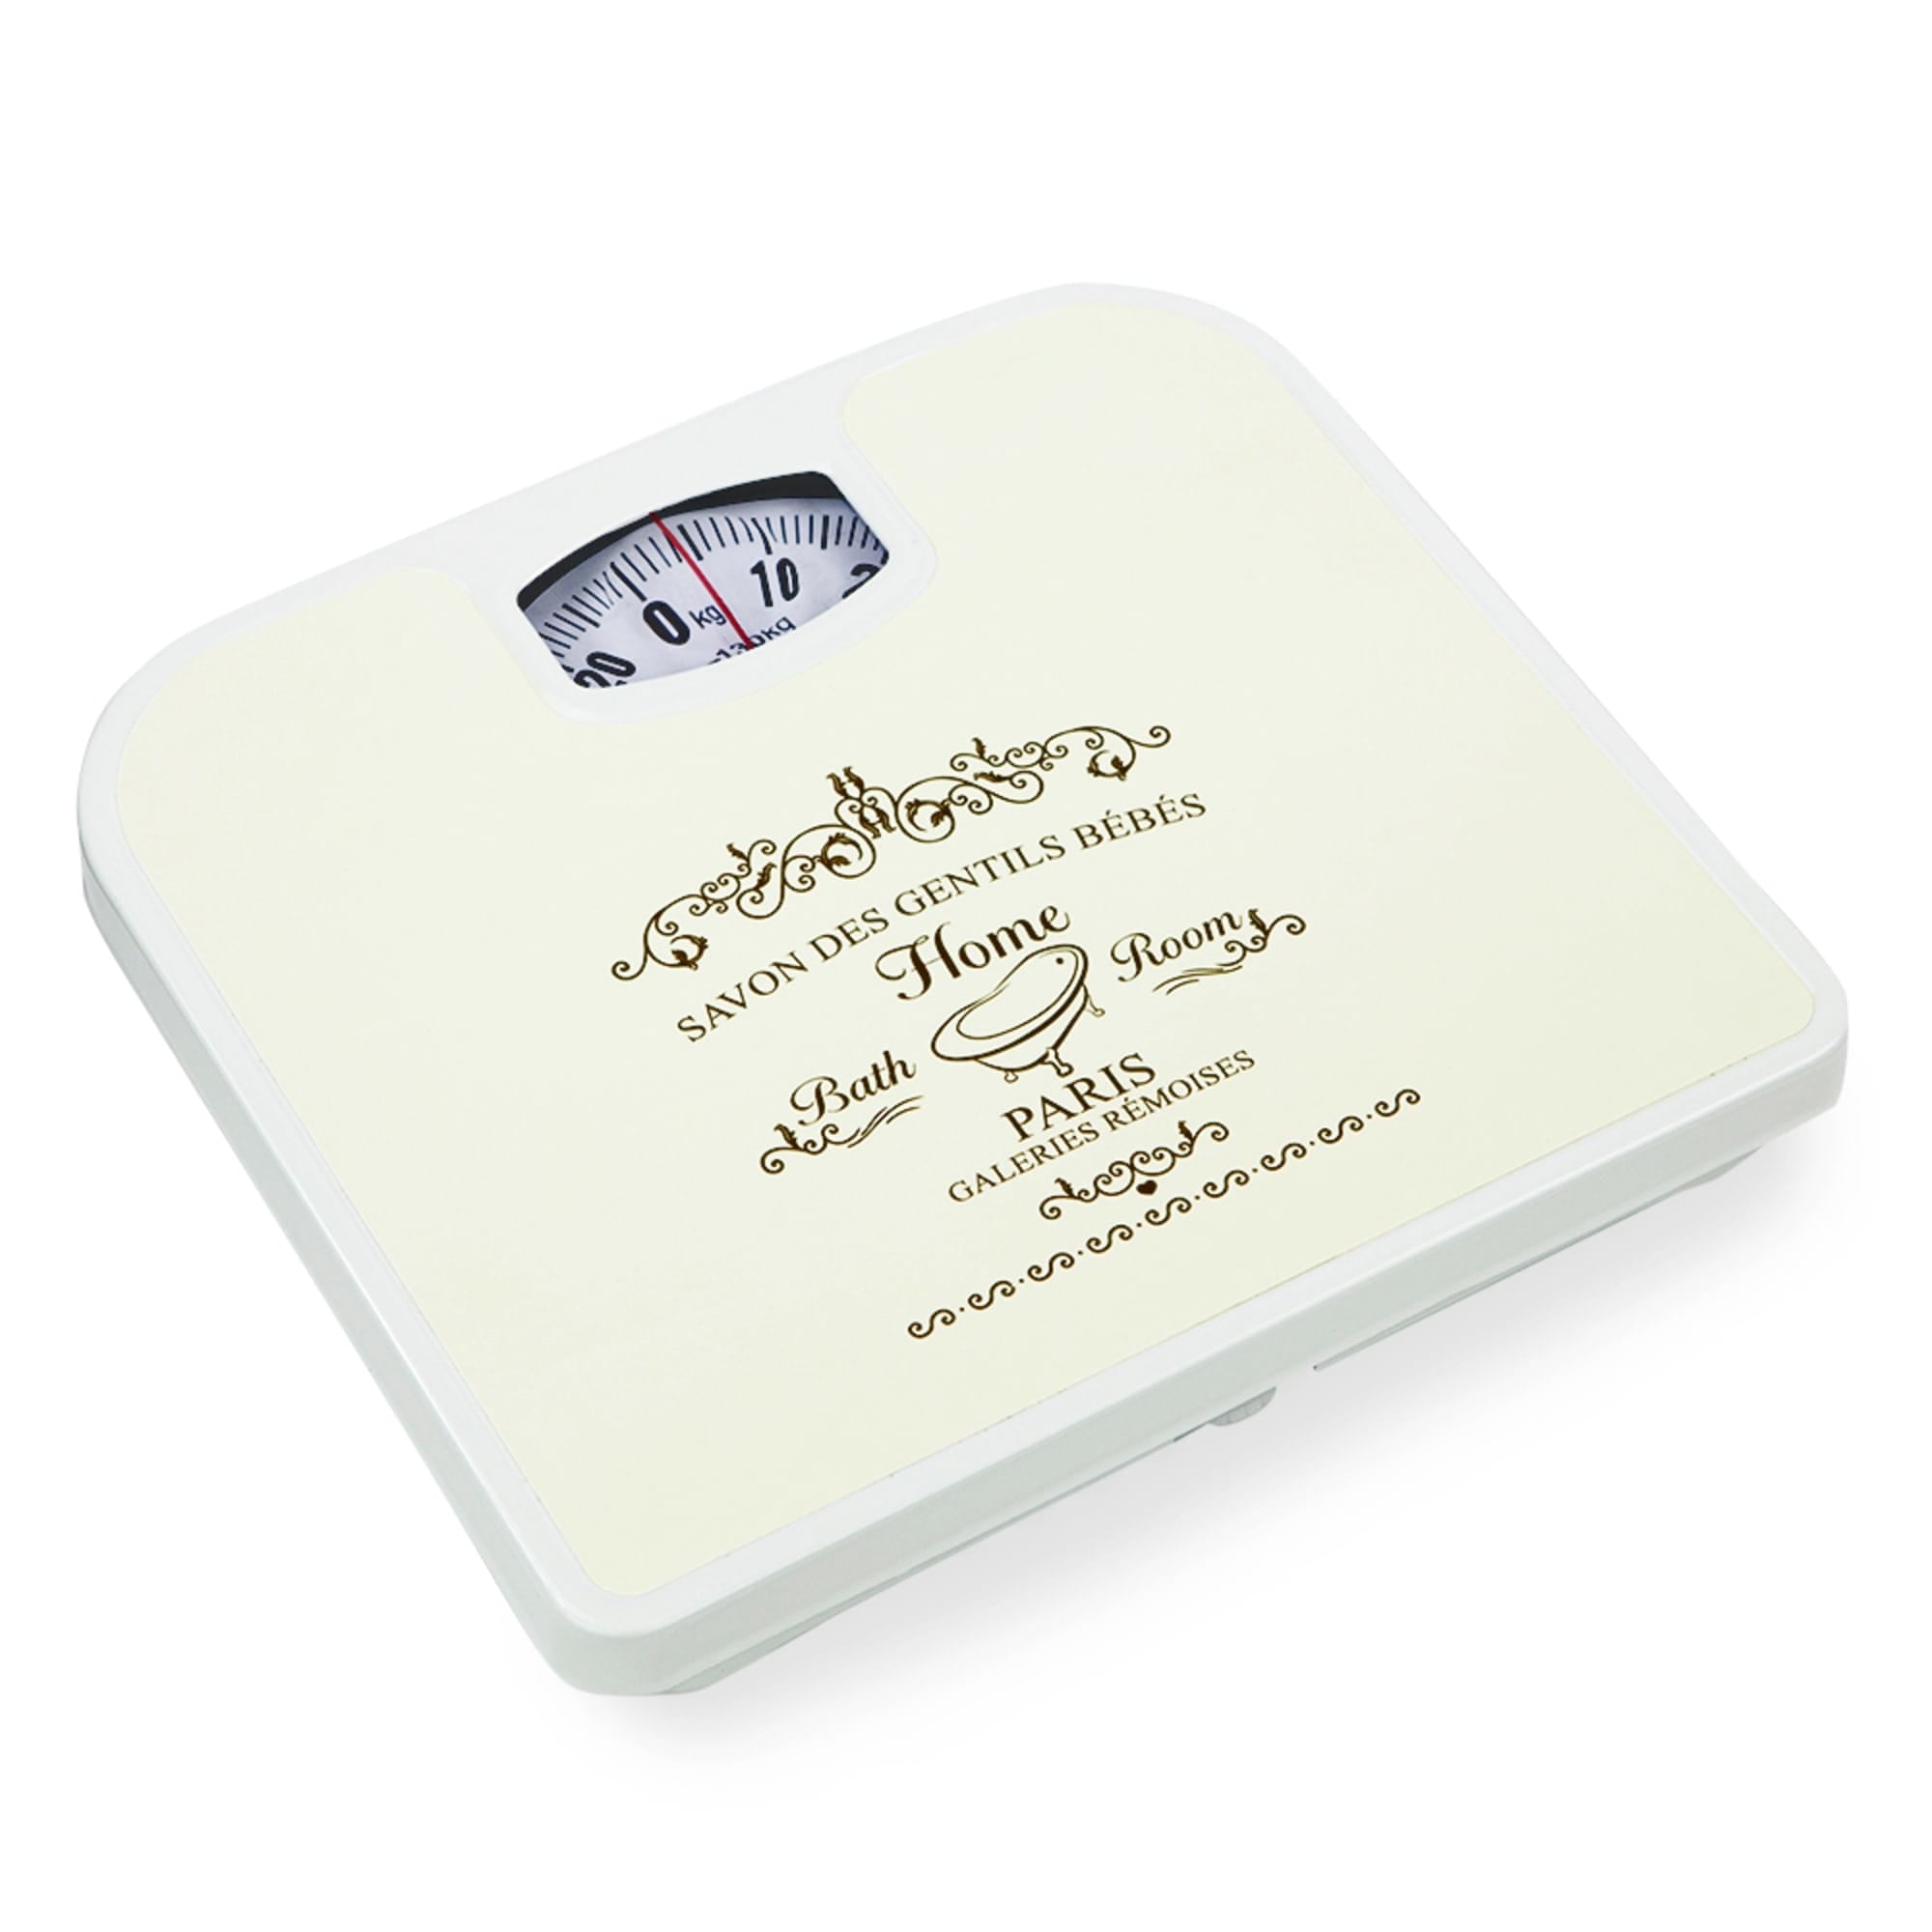 Home Basics Paris Mechanical Weighing Scale, Beige $8.00 EACH, CASE PACK OF 6